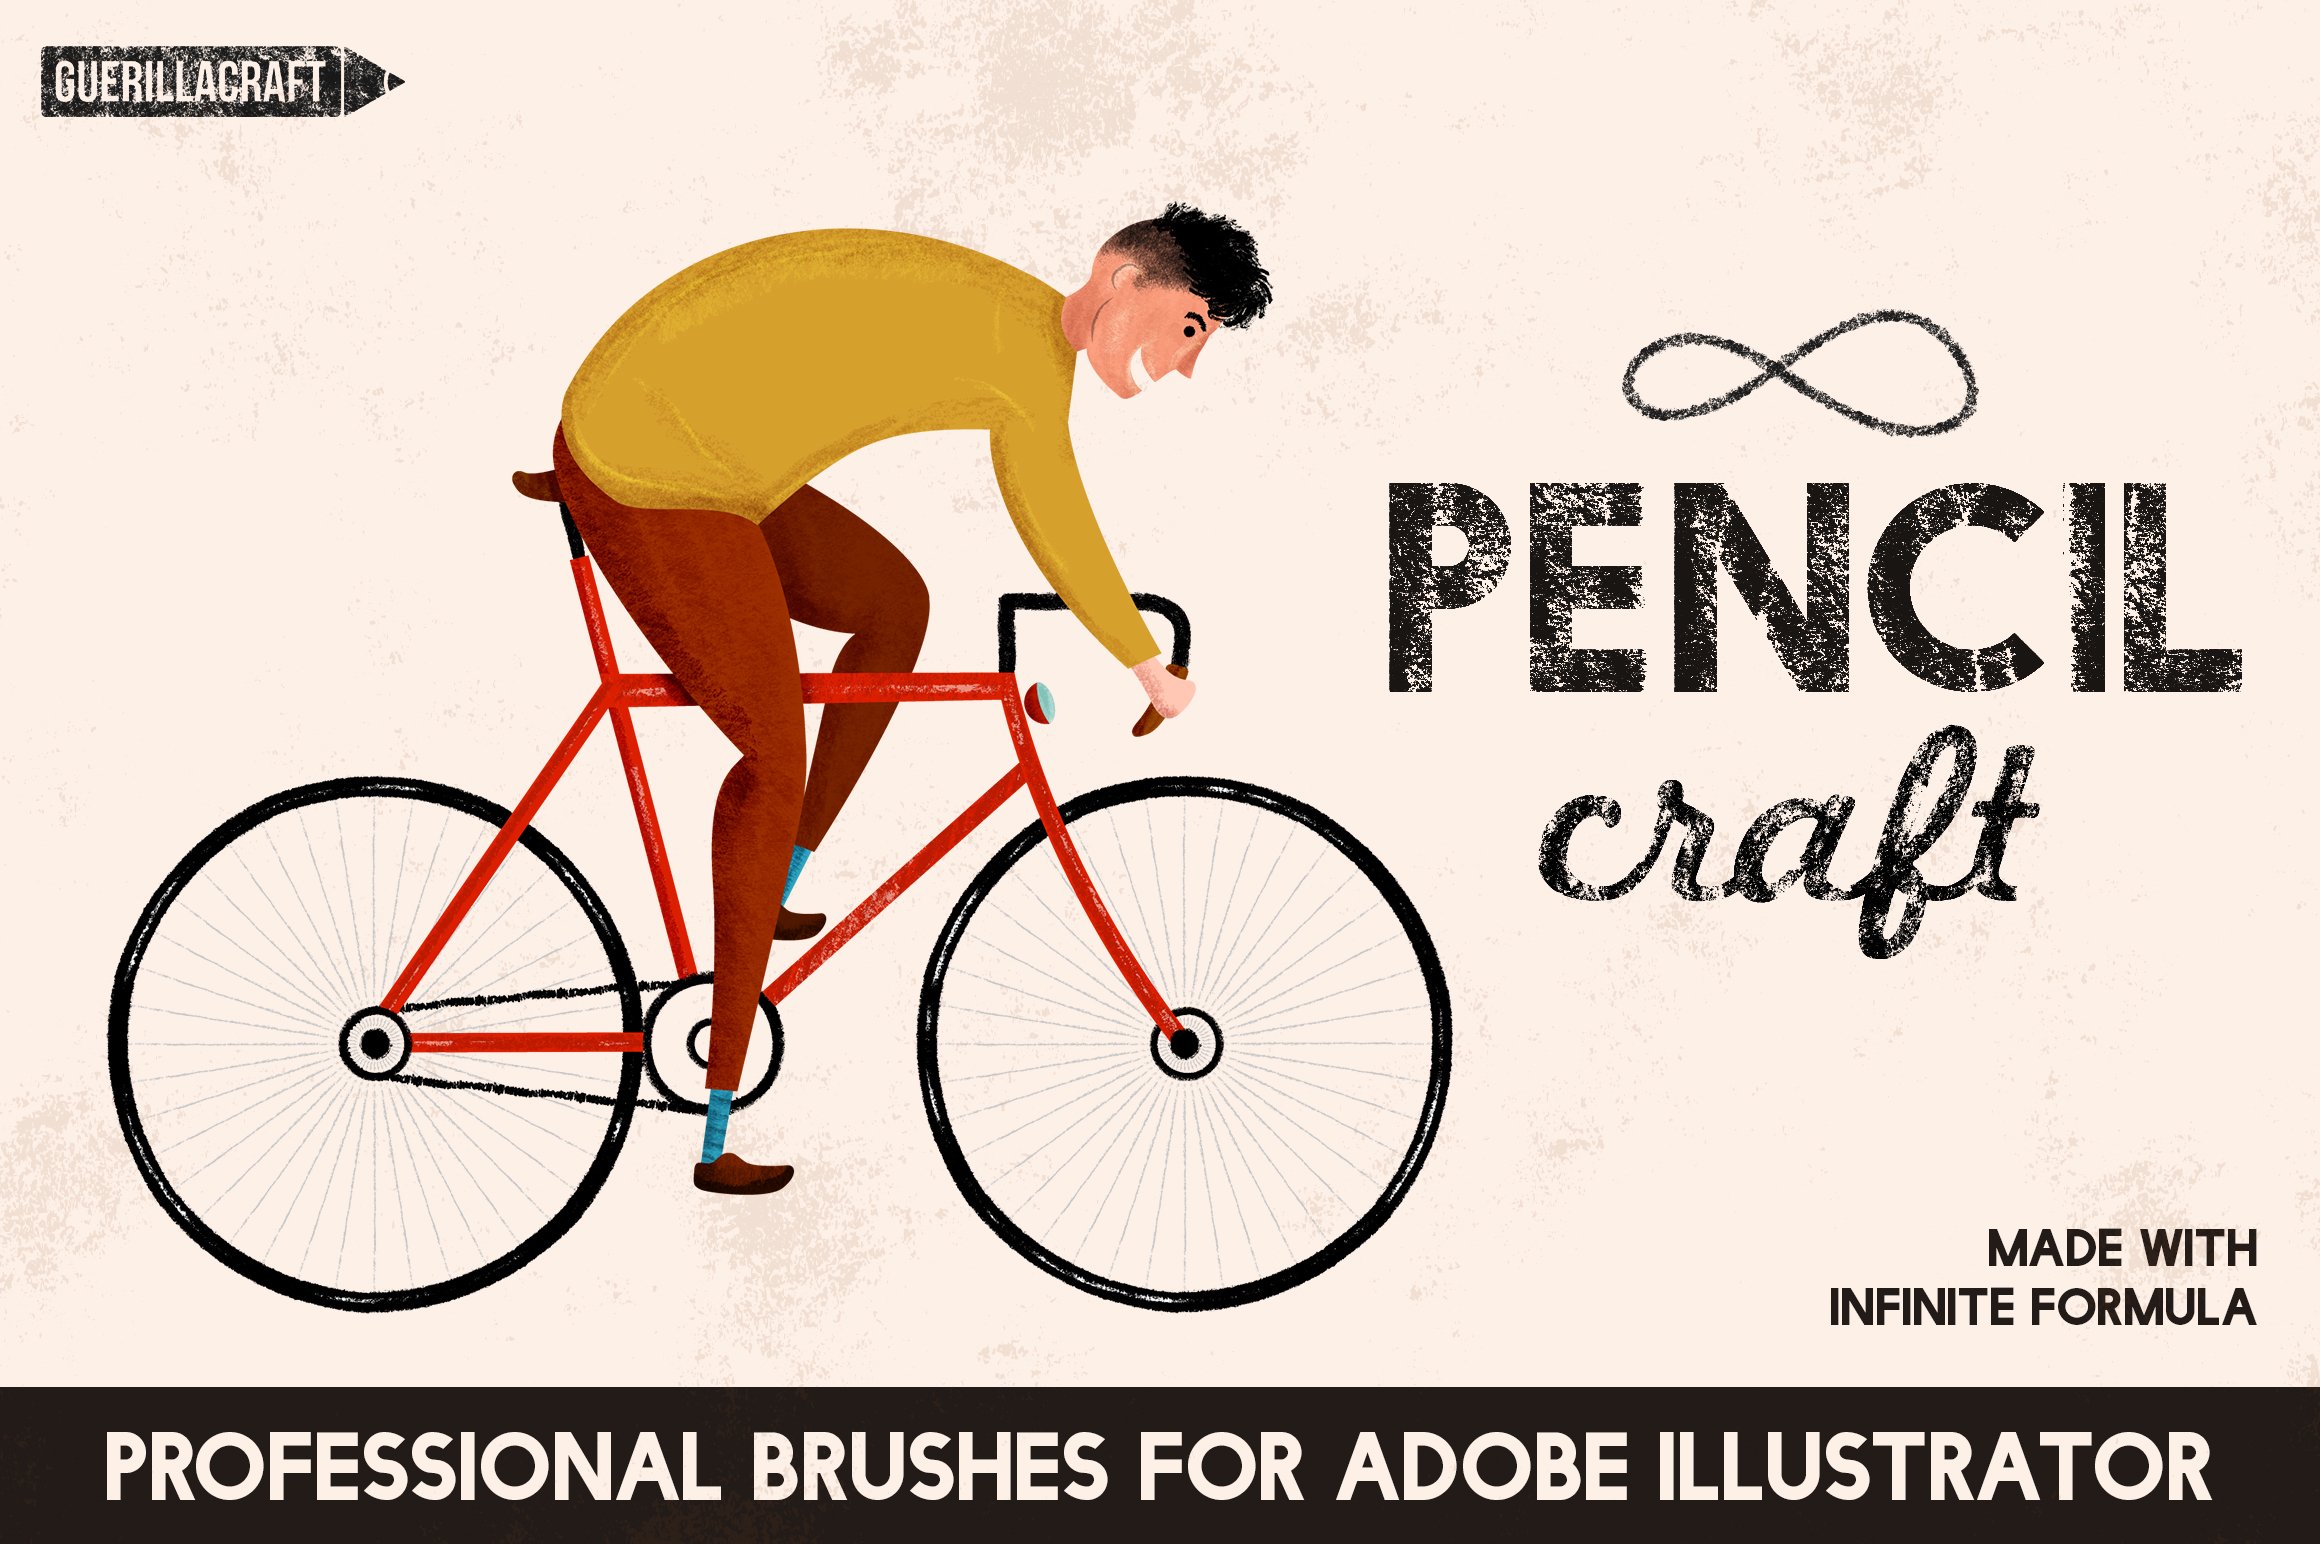 Pencilcraft Brushes by Guerillacraft cover image.